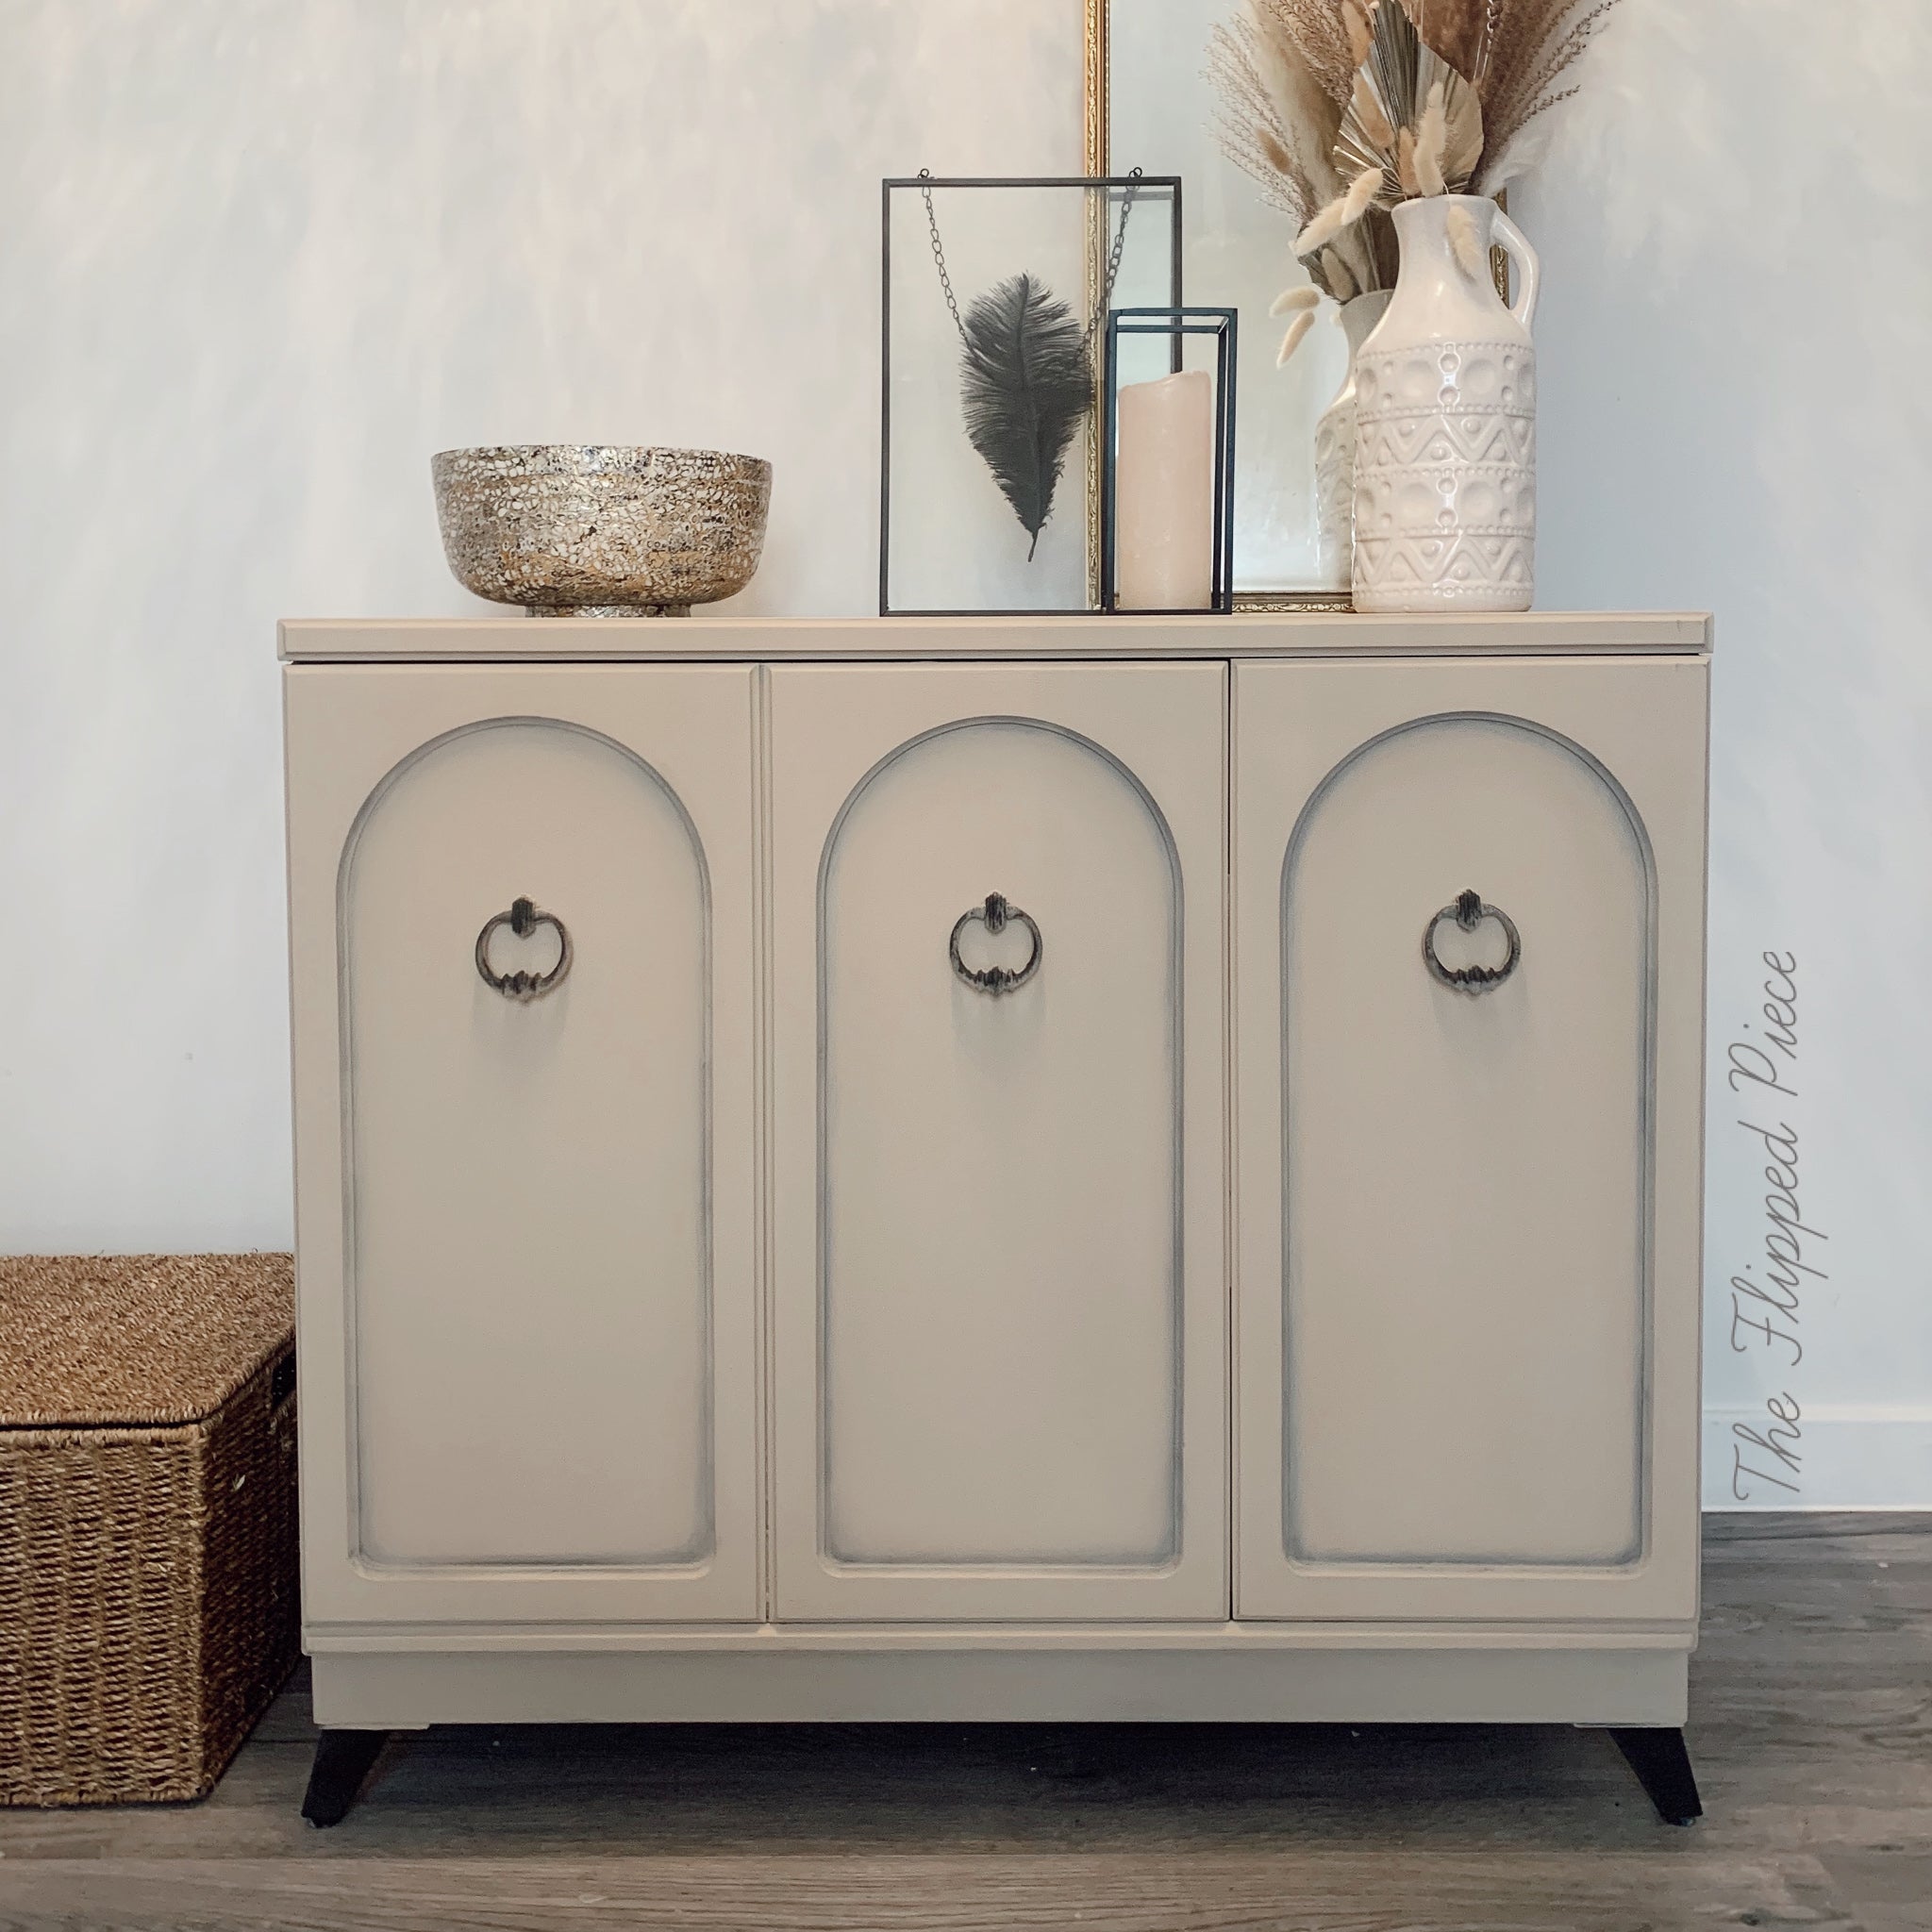 A vintage small buffet table refurbished by The Flipped Piece is painted with Dixie Belle's Burlap chalk mineral paint.